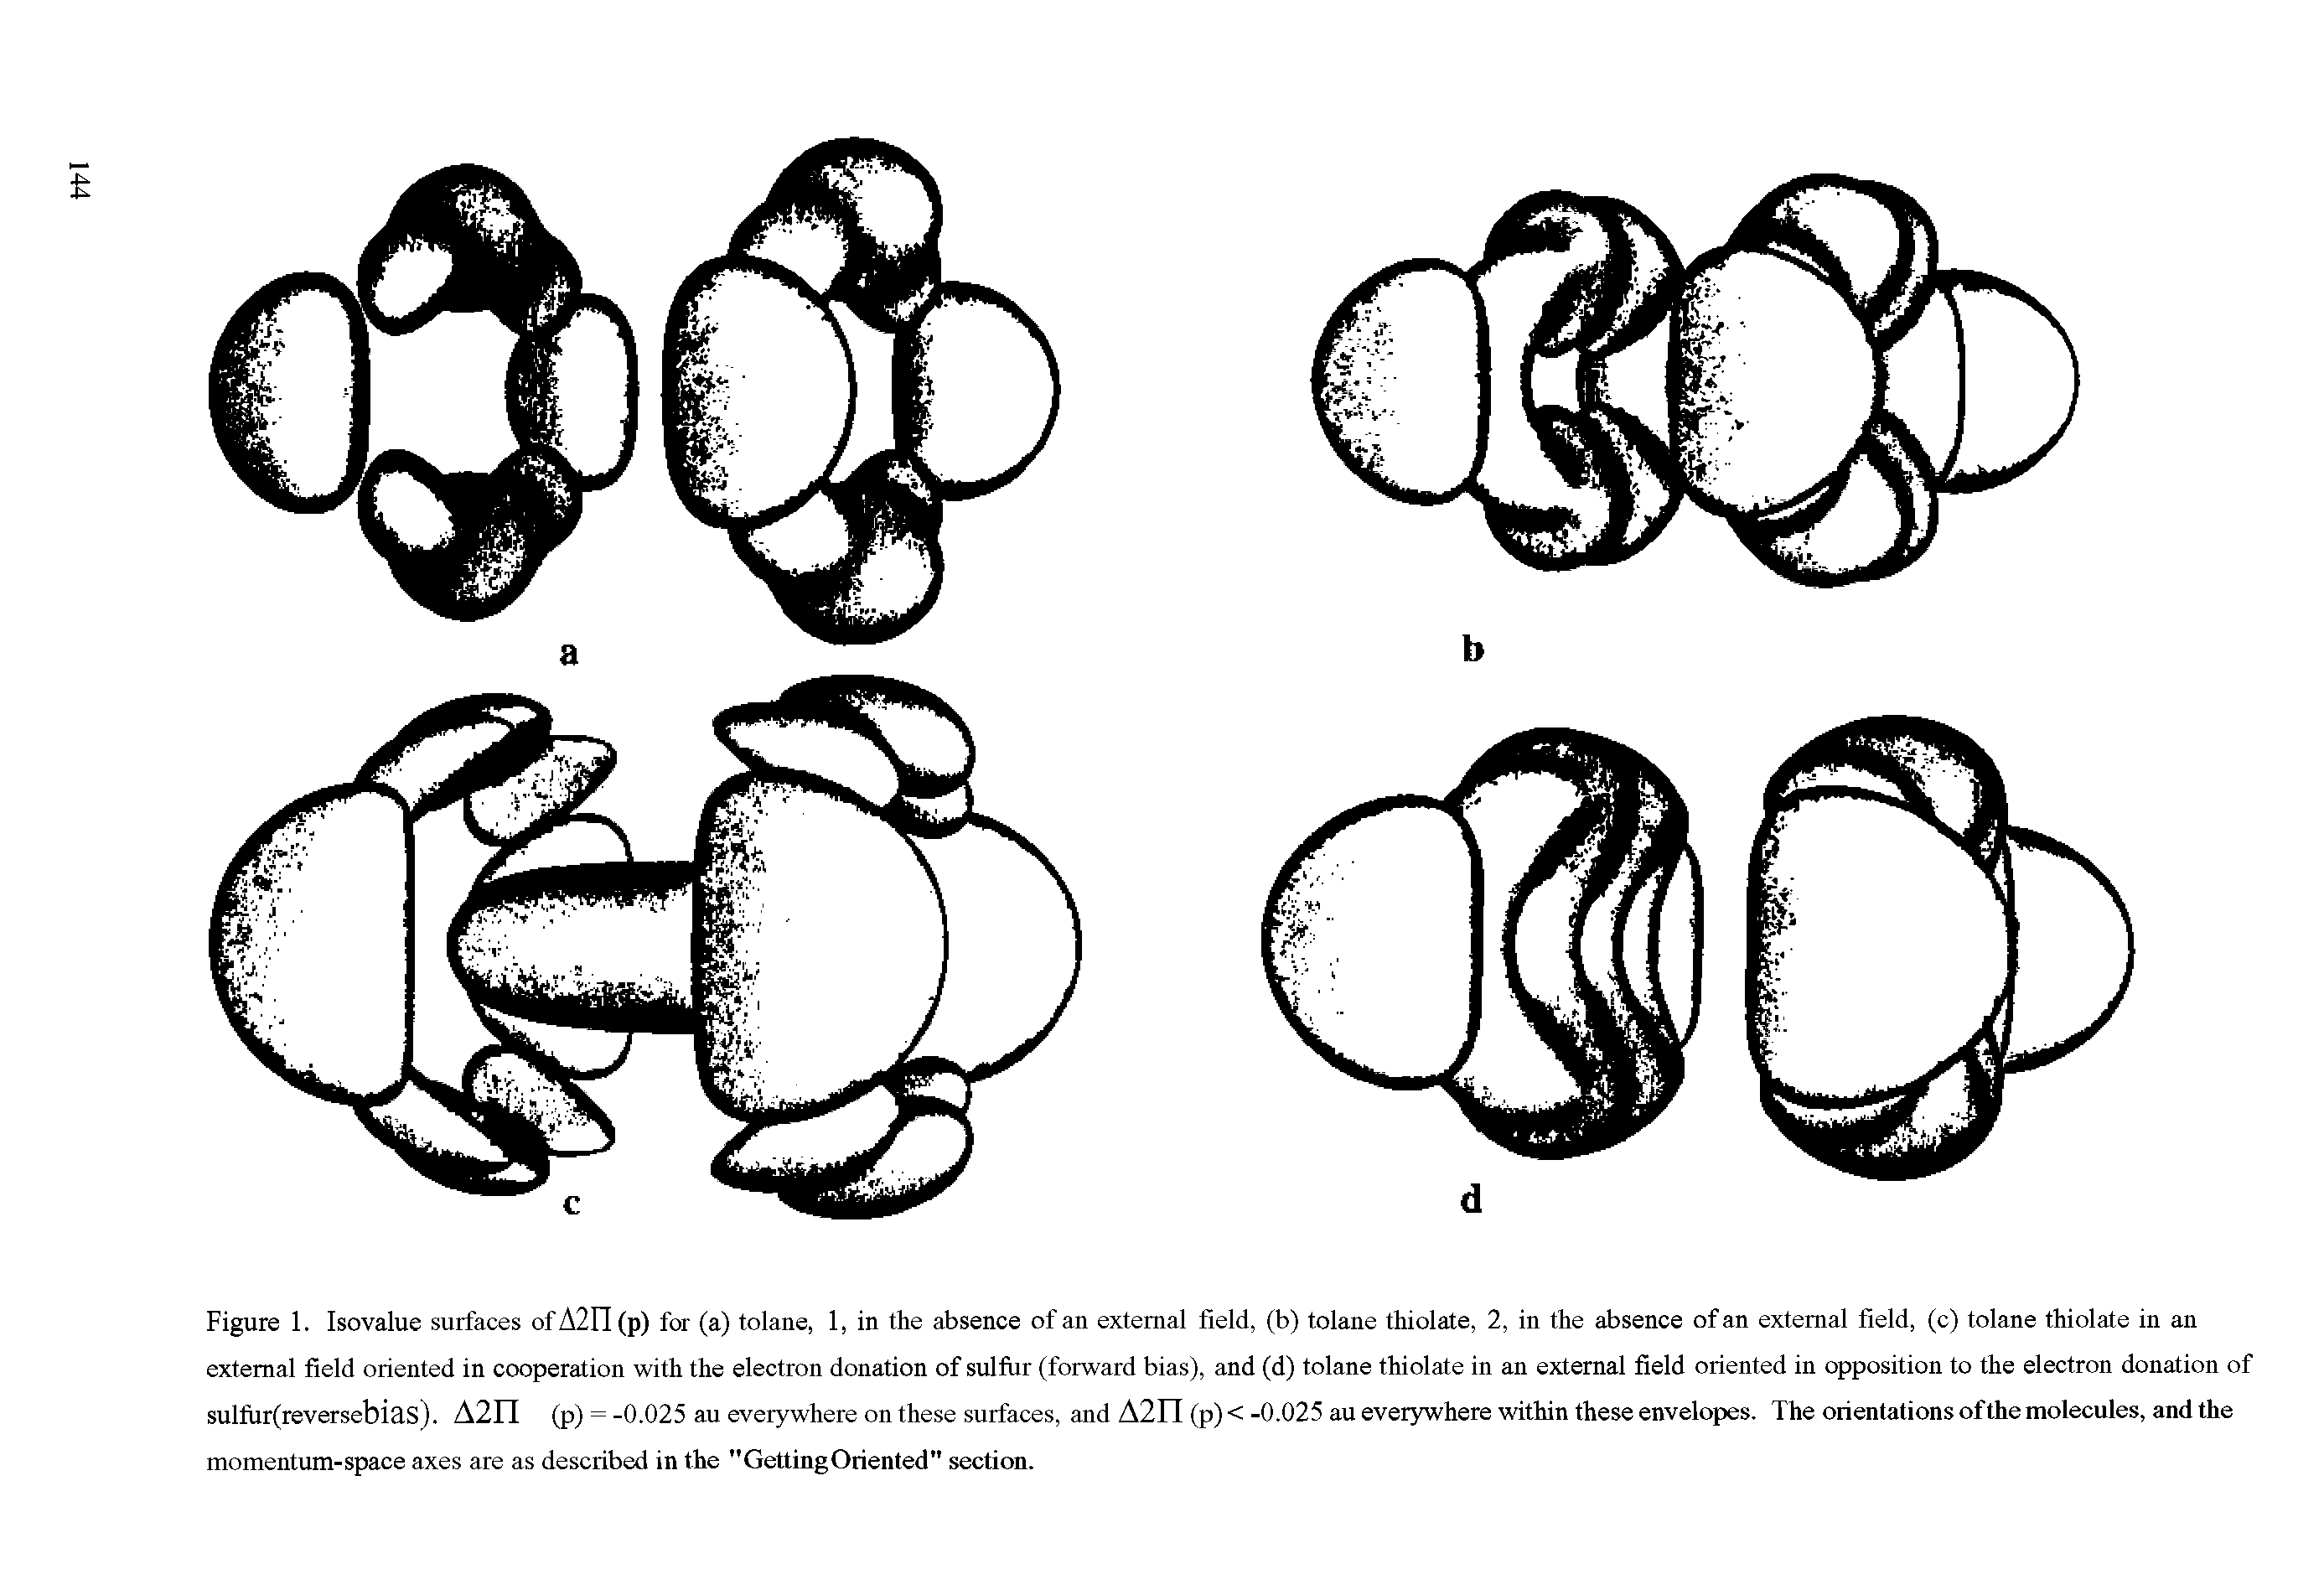 Figure 1. Isovalue surfaces of A2FI (p) for (a) tolane, 1, in the absence of an external field, (b) tolane thiolate, 2, in the absence of an external field, (c) tolane thiolate in an external field oriented in cooperation with the electron donation of sulfur (forward bias), and (d) tolane thiolate in an external field oriented in opposition to the electron donation of sulfur(reversebias). A2II (p) = -0.025 au everywhere on these surfaces, and A2n (p)< -0.025 au everywhere within these envelopes. The orientations of the molecules, and the momentum-space axes are as described in the "GettingOriented" section.